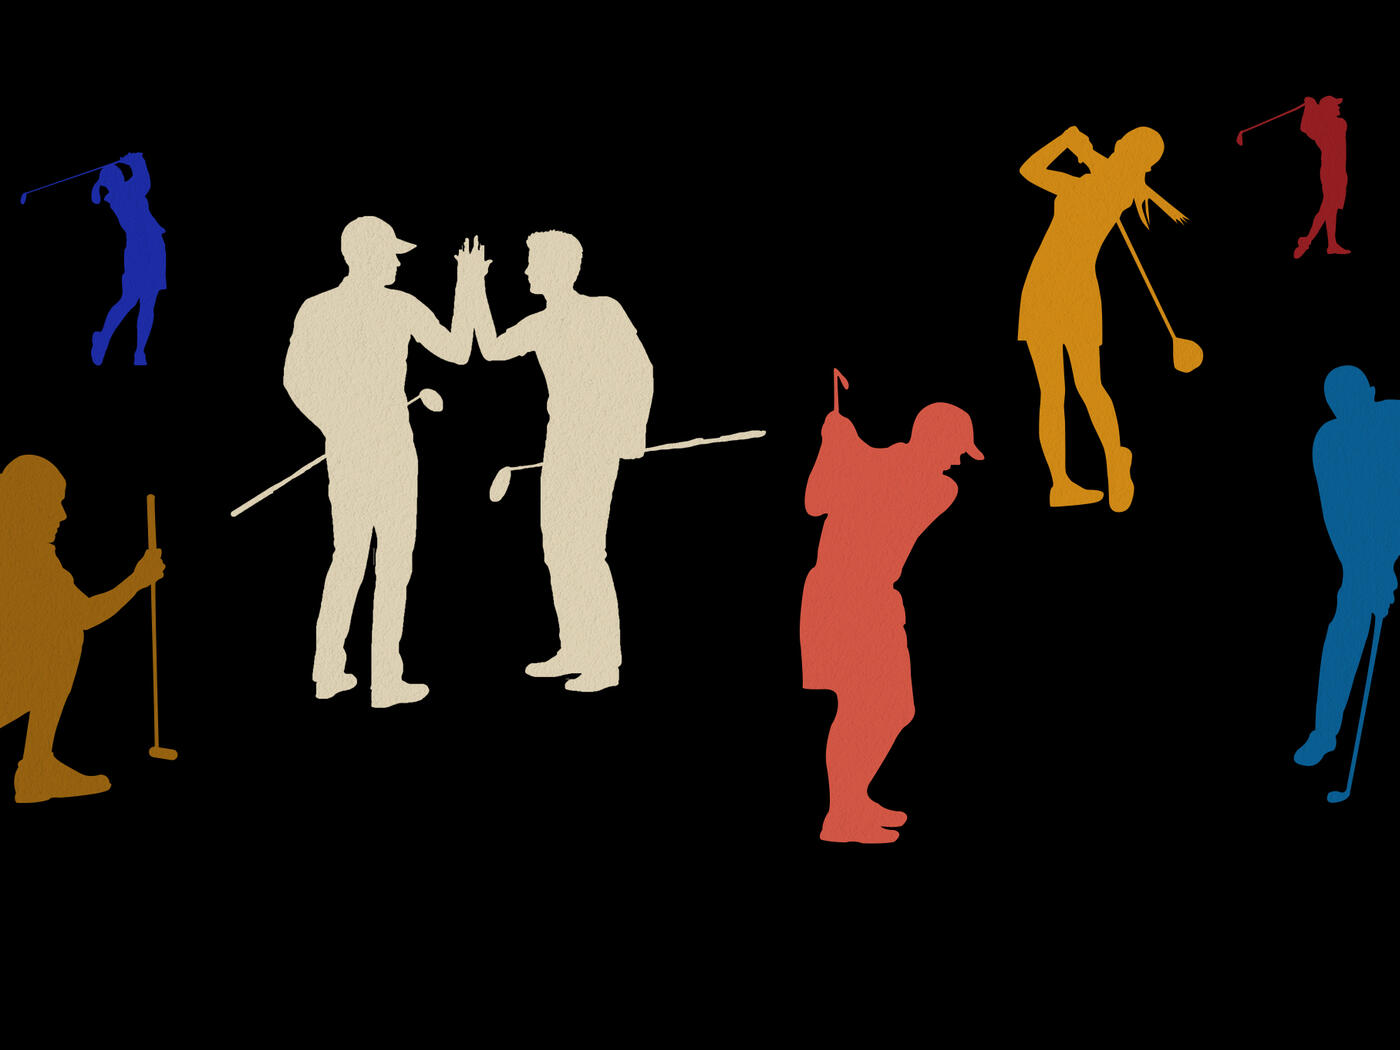 Various people represented in different colors playing golf